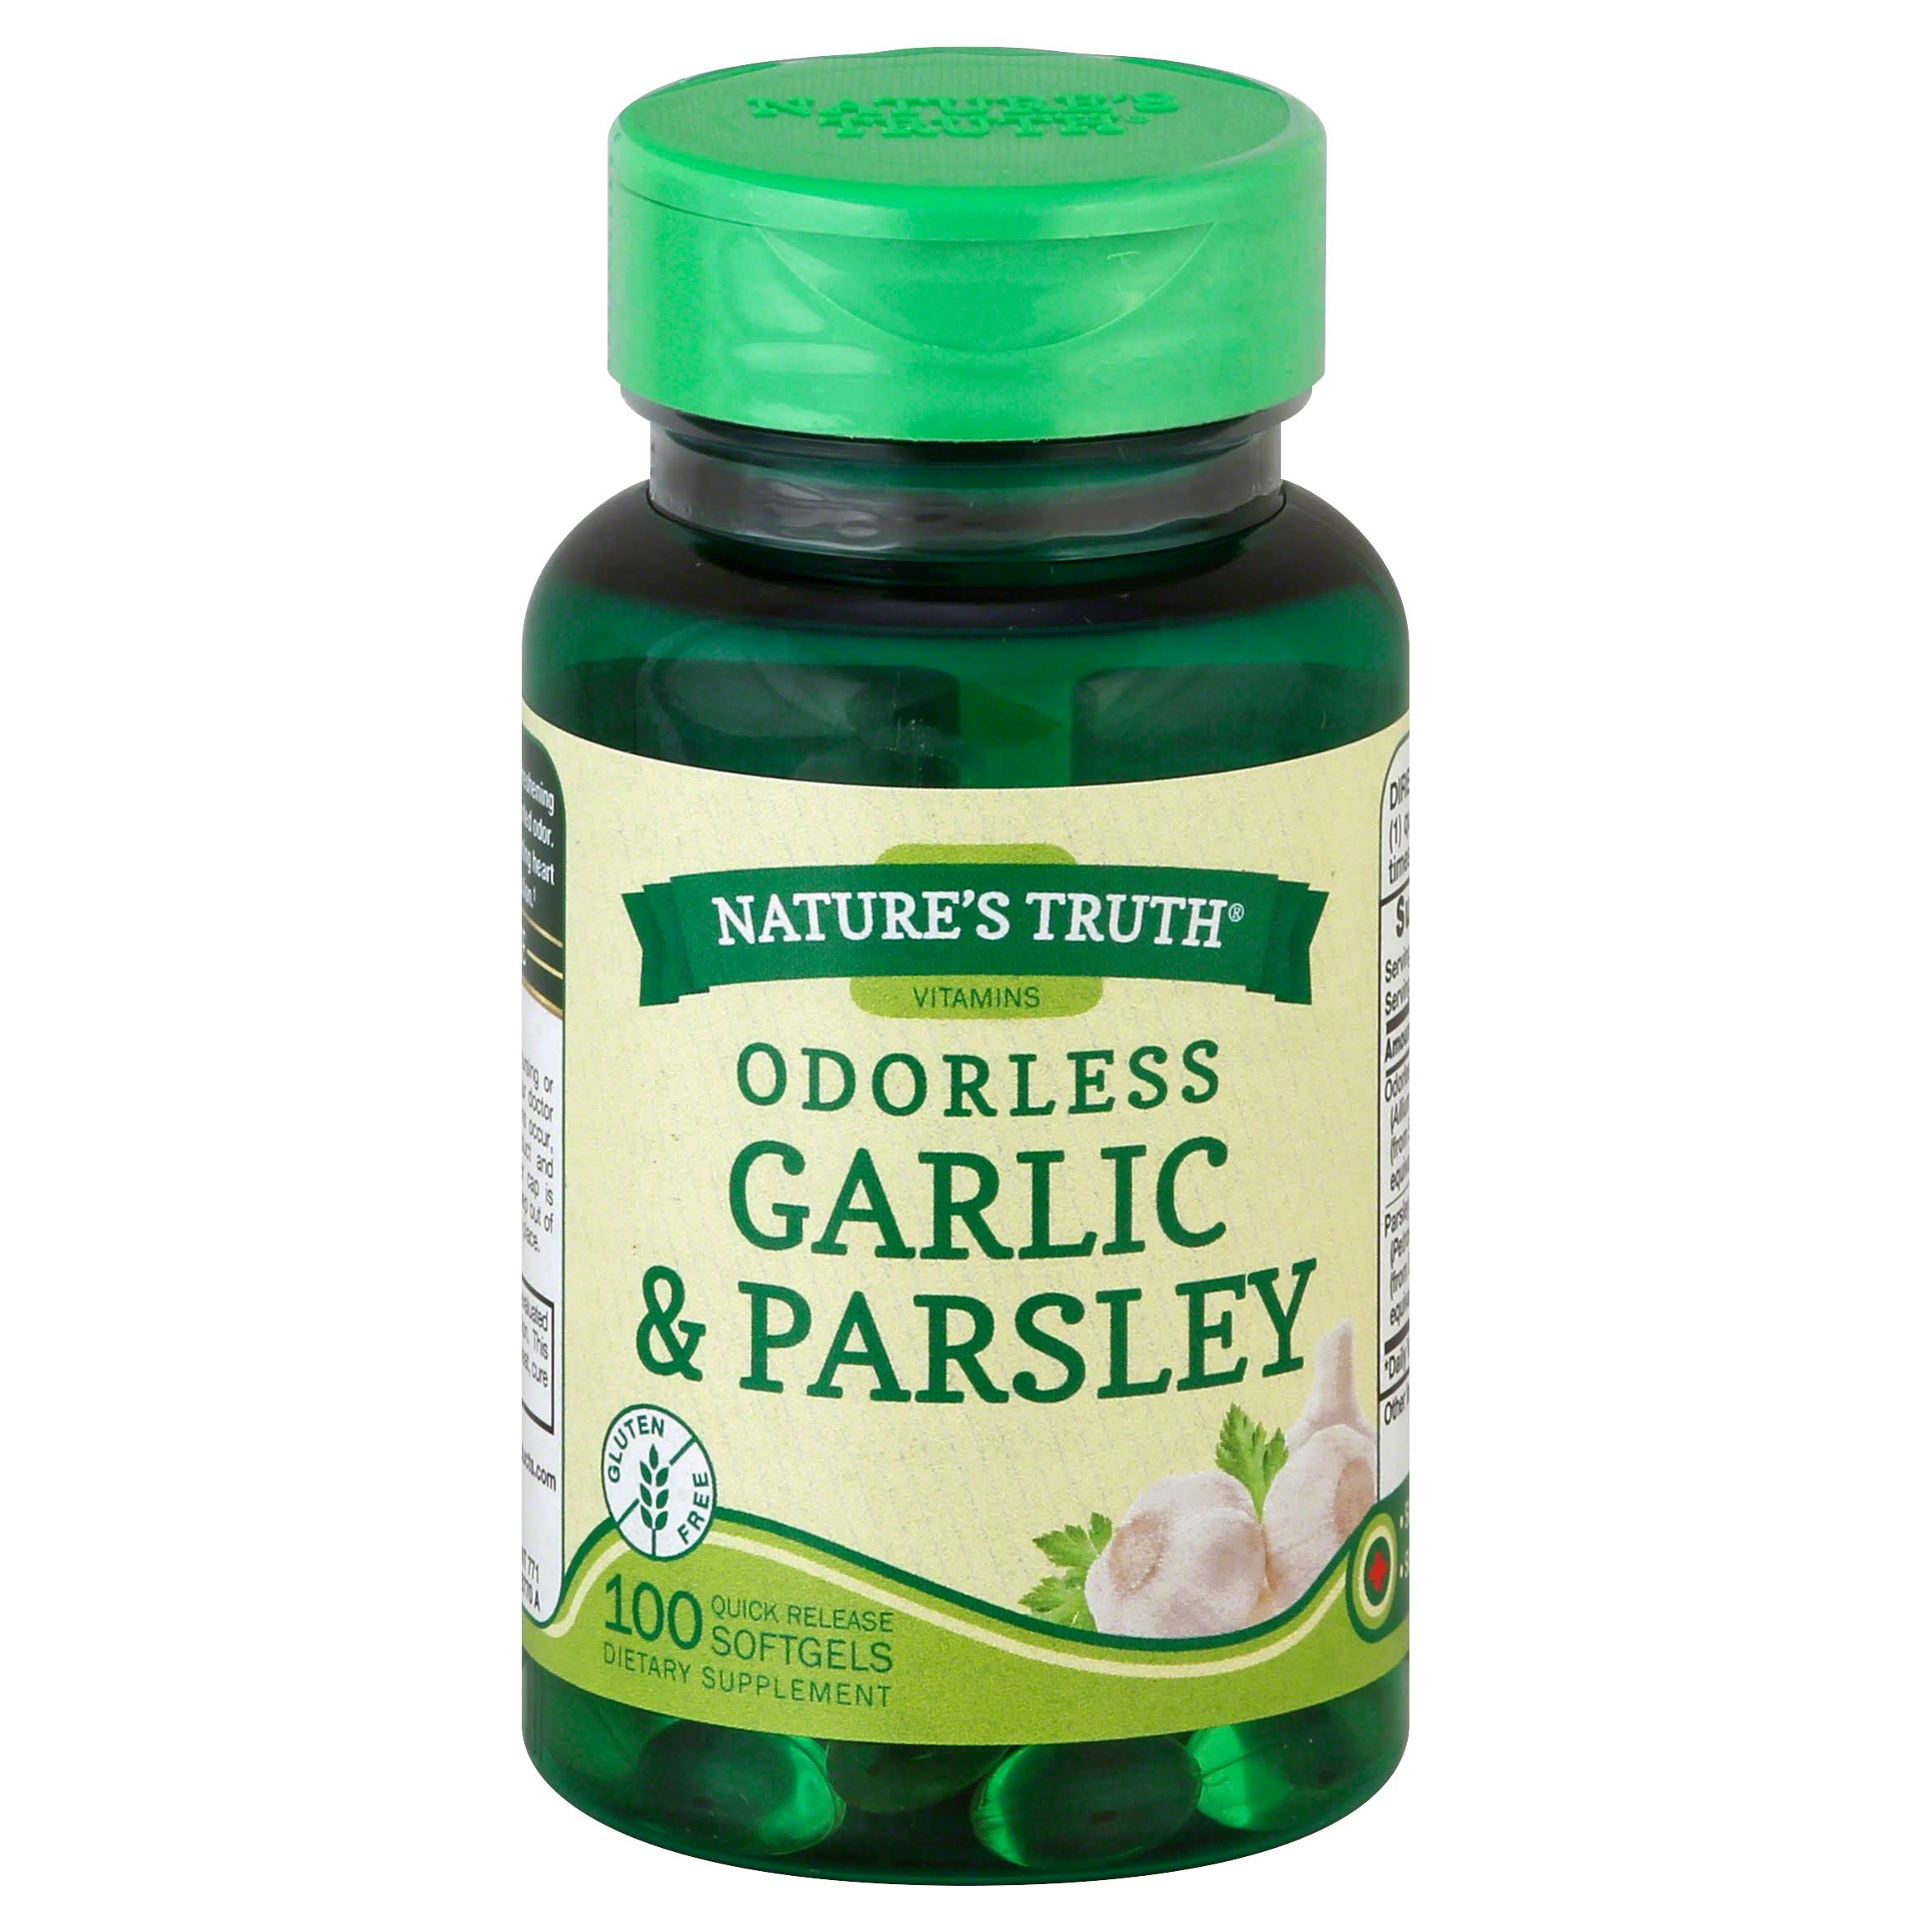 Natures Truth Garlic & Parsley, Odorless, Quick Release Softgels - 100 softgels